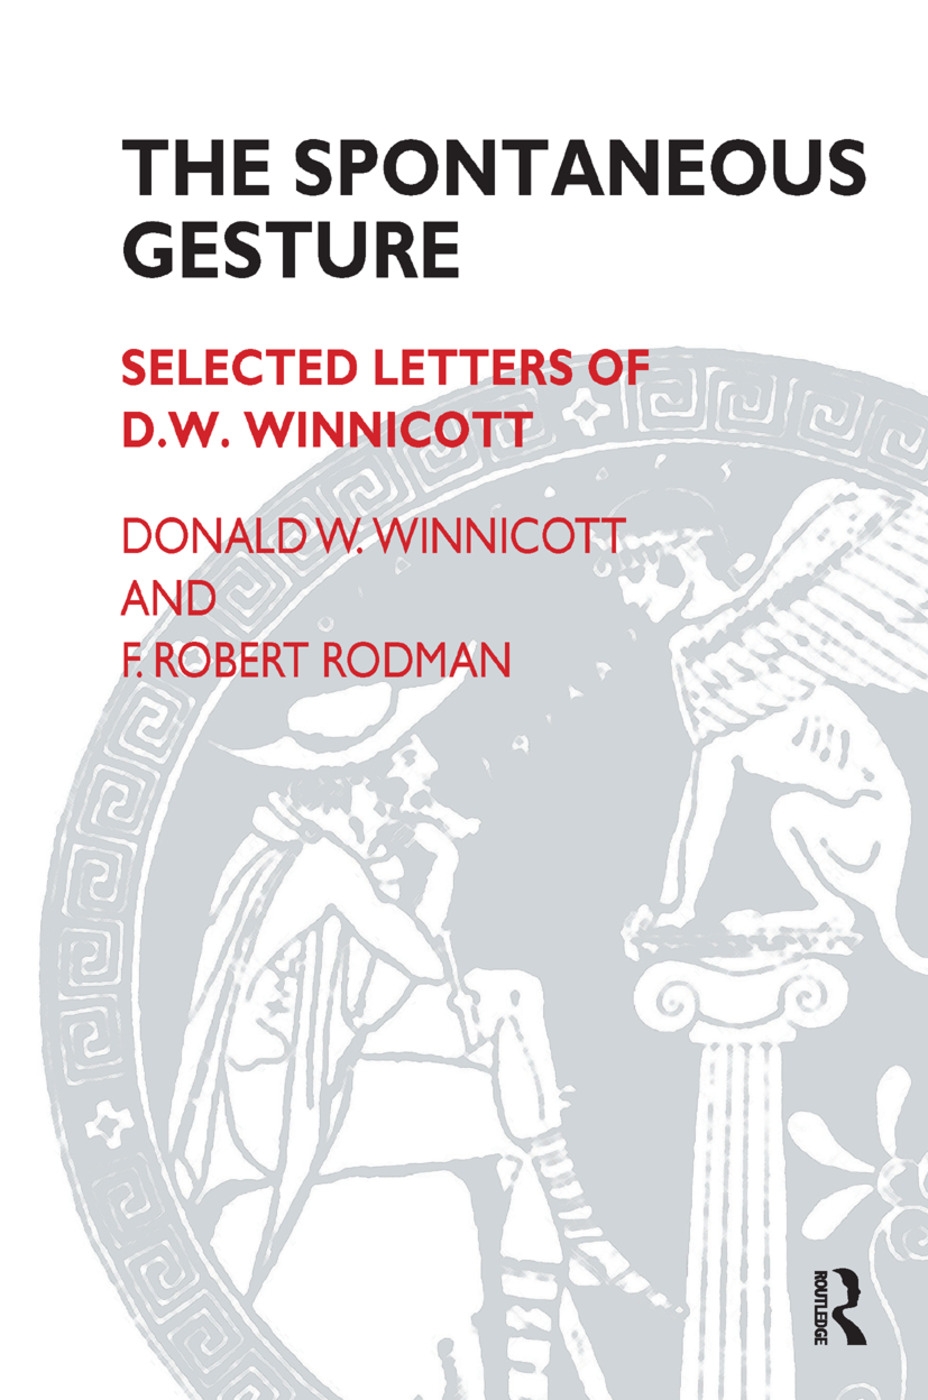 The Spontaneous Gesture: Selected Letters of D. W. Winnicott